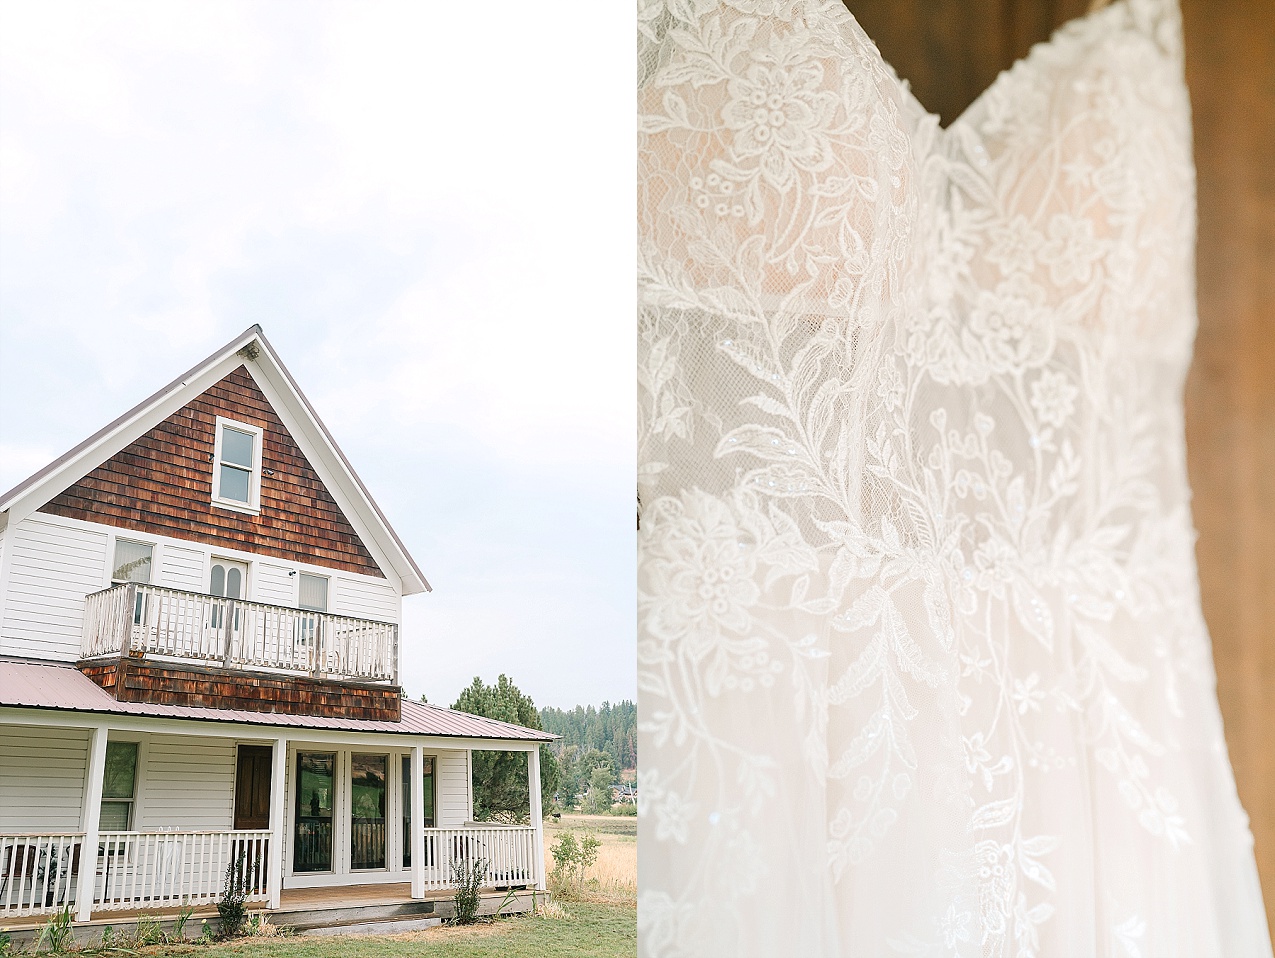 The Cattle Barn Wedding Ellensburg WA Andrew and Dani farmhouse and bride's dress details